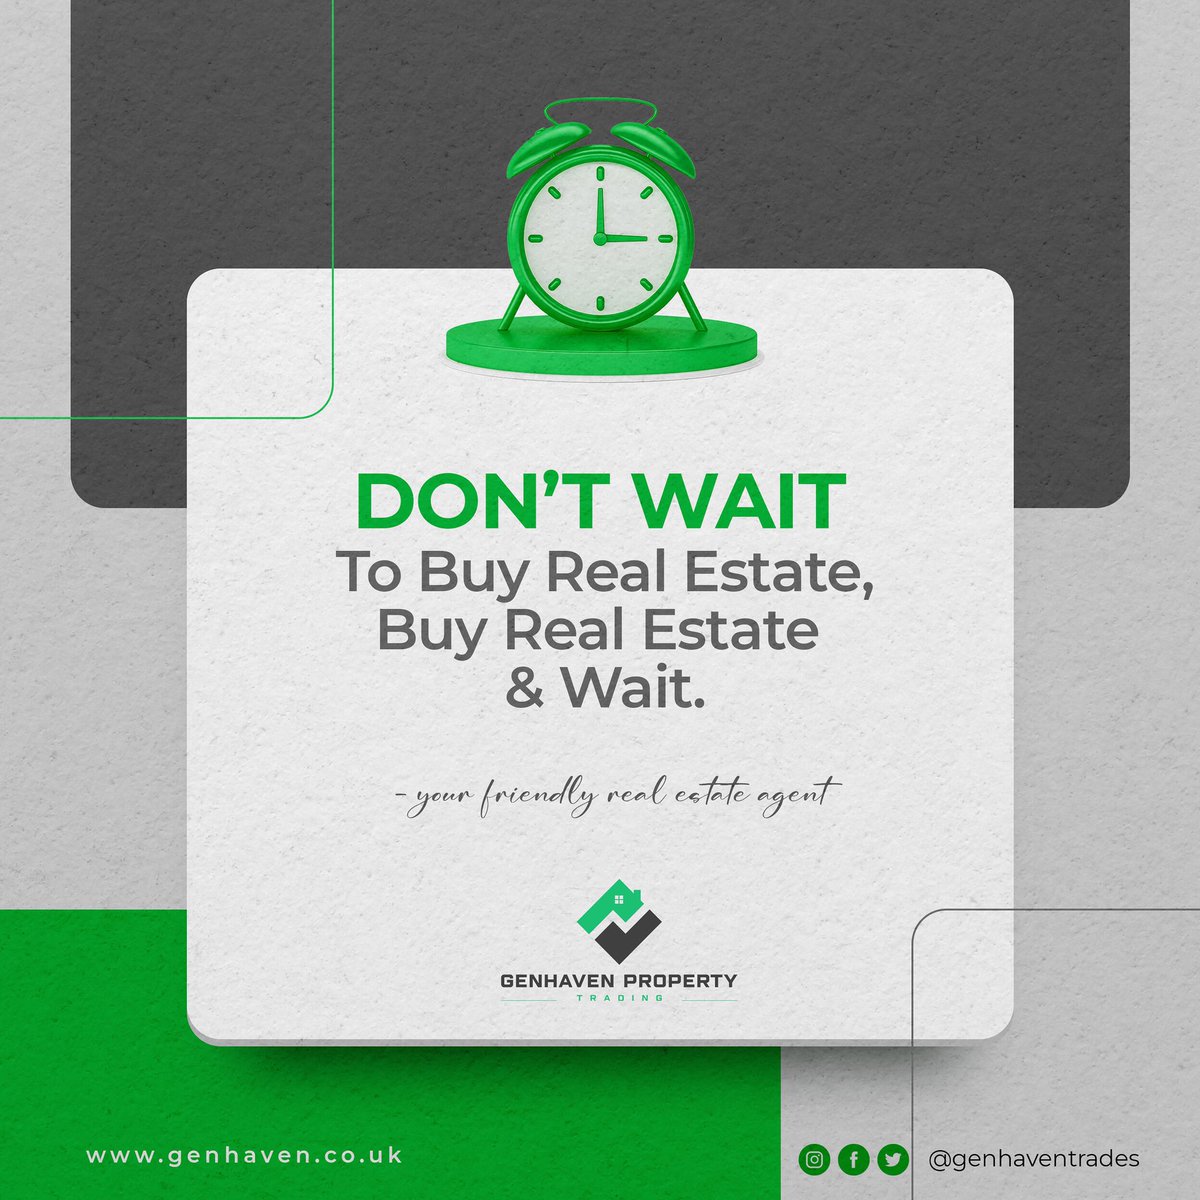 I’m pretty sure almost everyone has heard this saying once in their life 😂. Well,it’s never too late to buy real estate.

#realestate #property #propertyinlagos #propertyverification